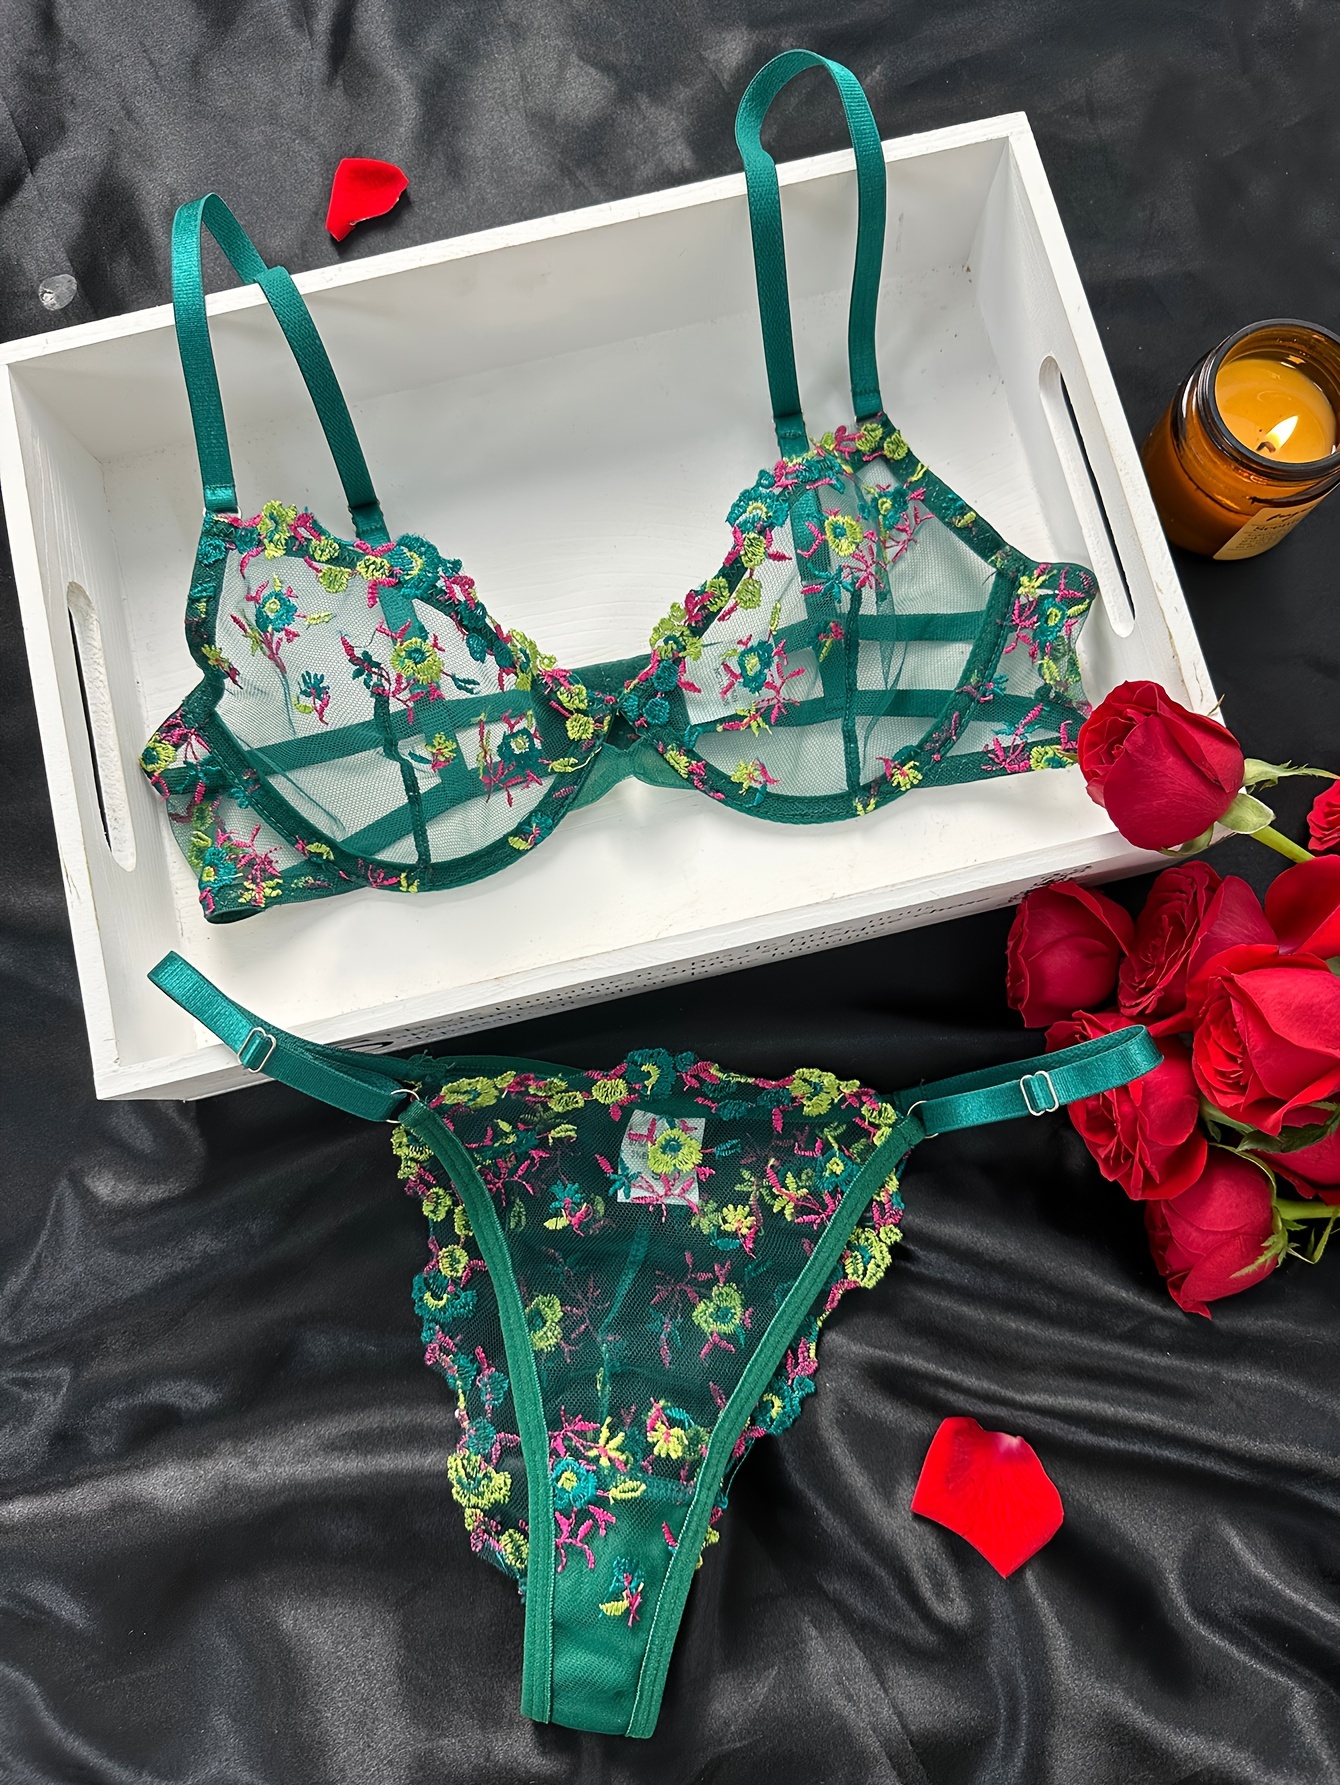  Bolayu Floral Embroidered Mesh Lingerie Set Women's